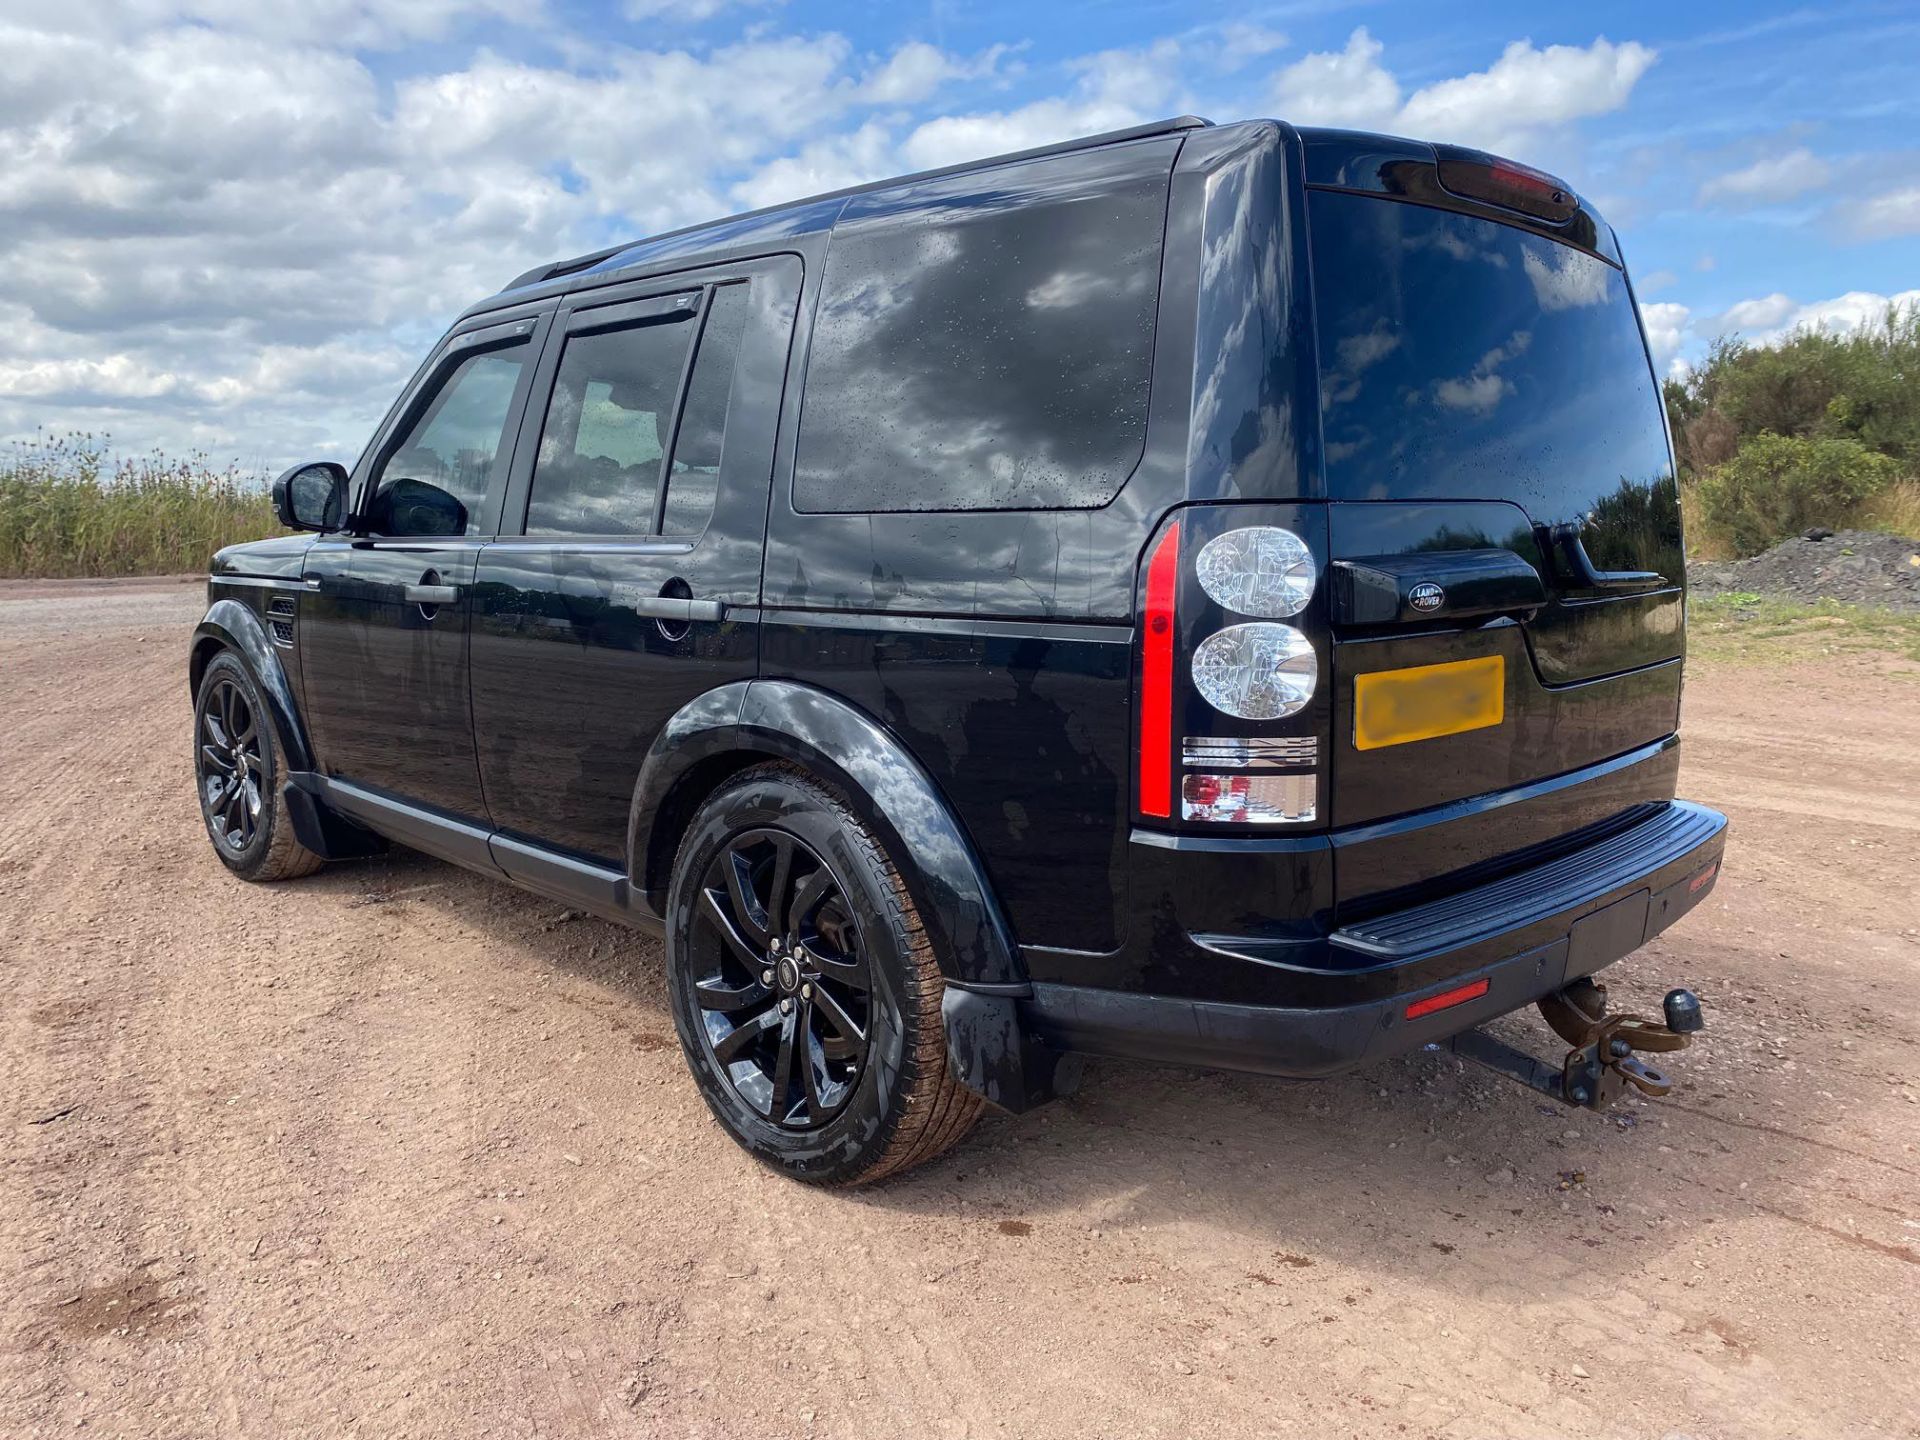 2015 LAND ROVER DISCOVERY XS SDV6 AUTO BLACK CONVERTED COMMERCIAL – WITH REAR SEAT CONVERSION - Image 5 of 16